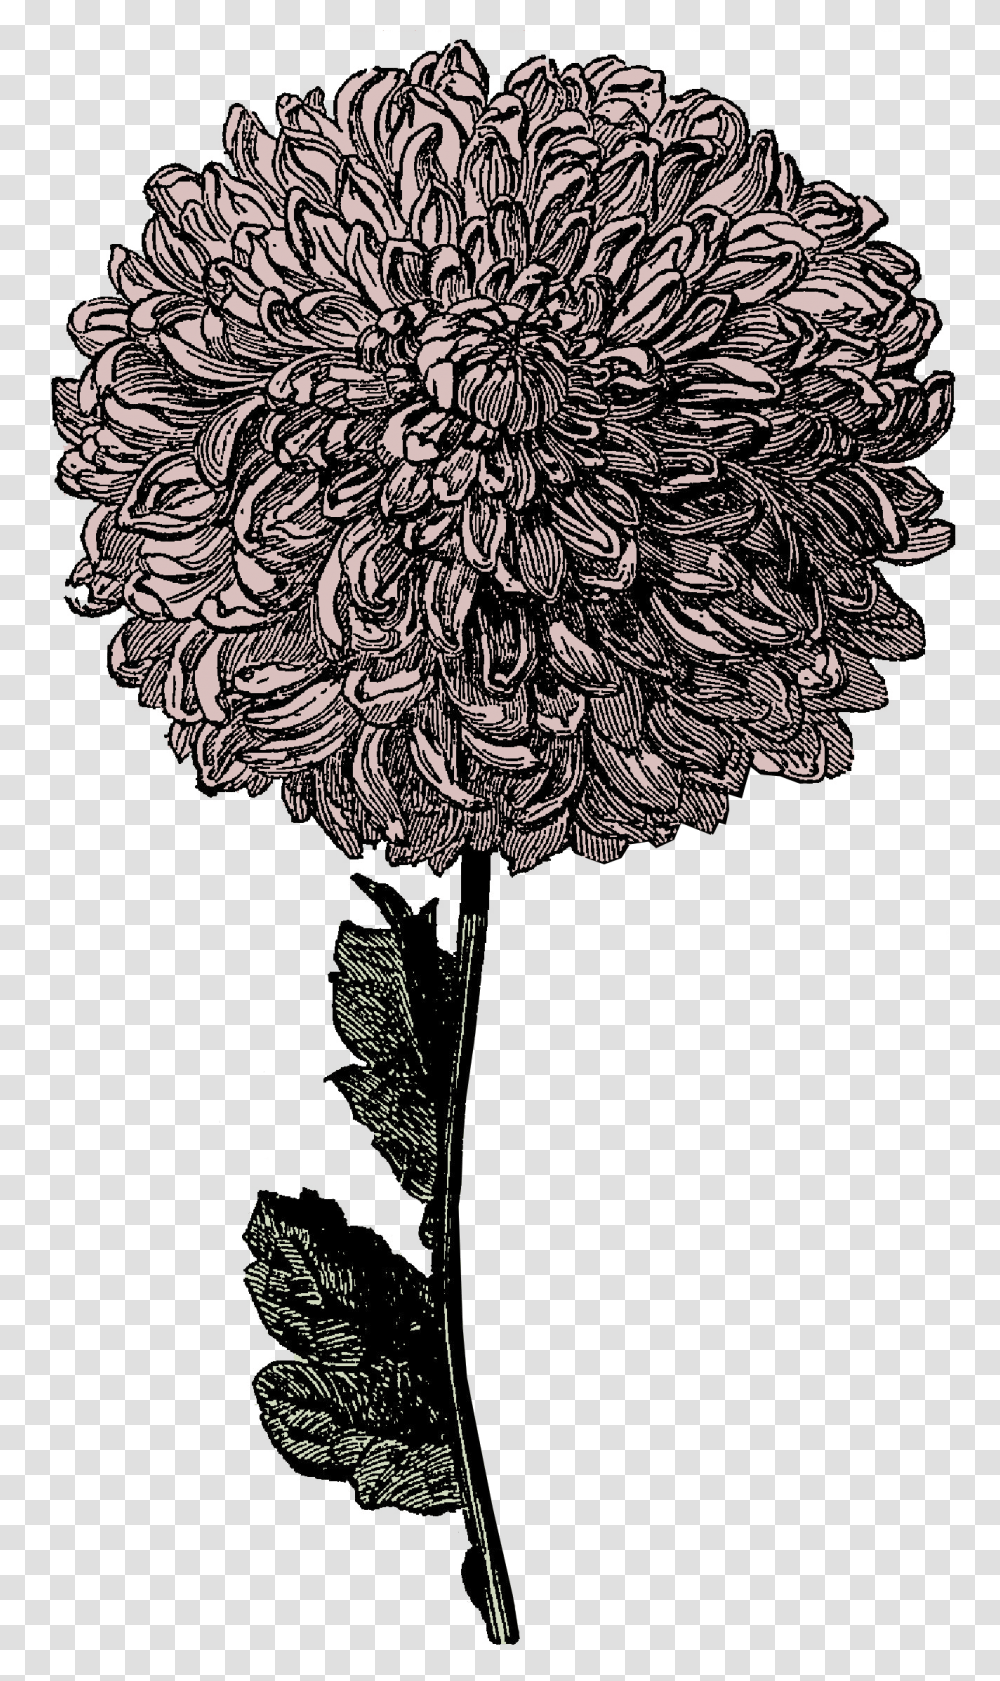 Go Ahead And Print It, Plant, Flower, Blossom, Floral Design Transparent Png